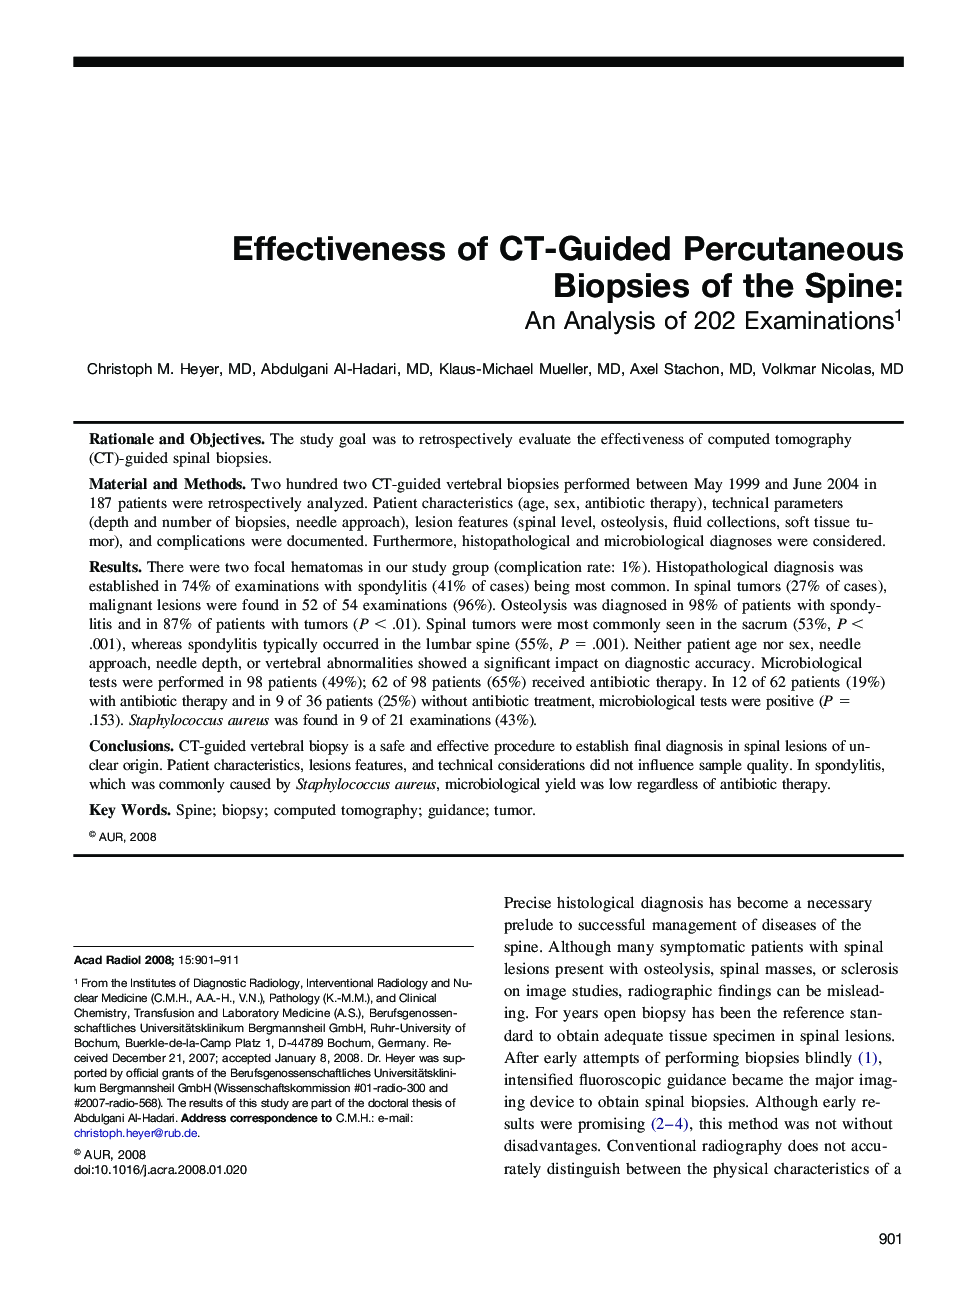 Effectiveness of CT-Guided Percutaneous Biopsies of the Spine